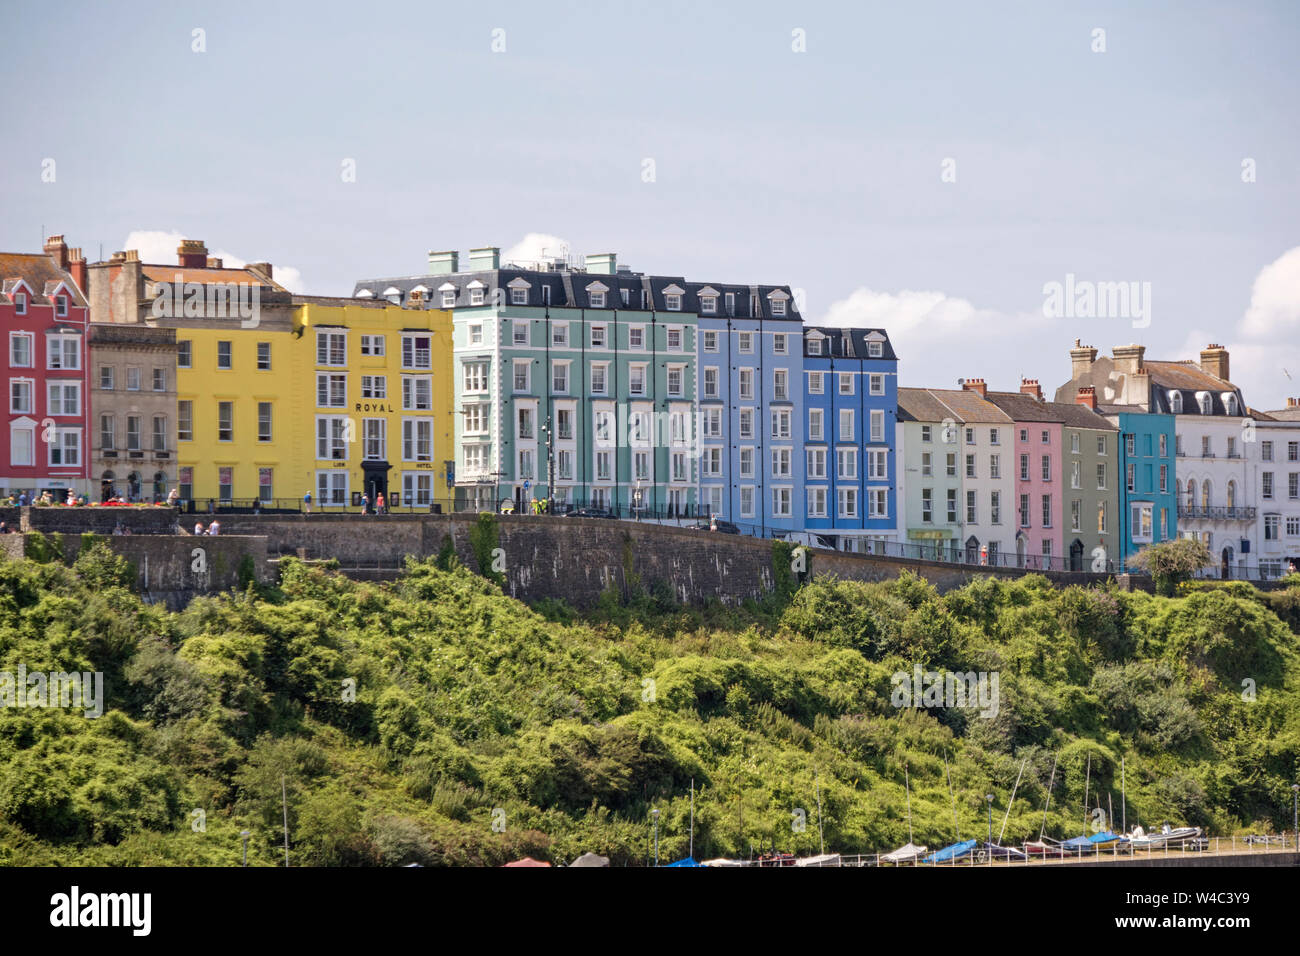 The Welsh coastal town of Tenby, Pembrokeshire, Wales, UK Stock Photo